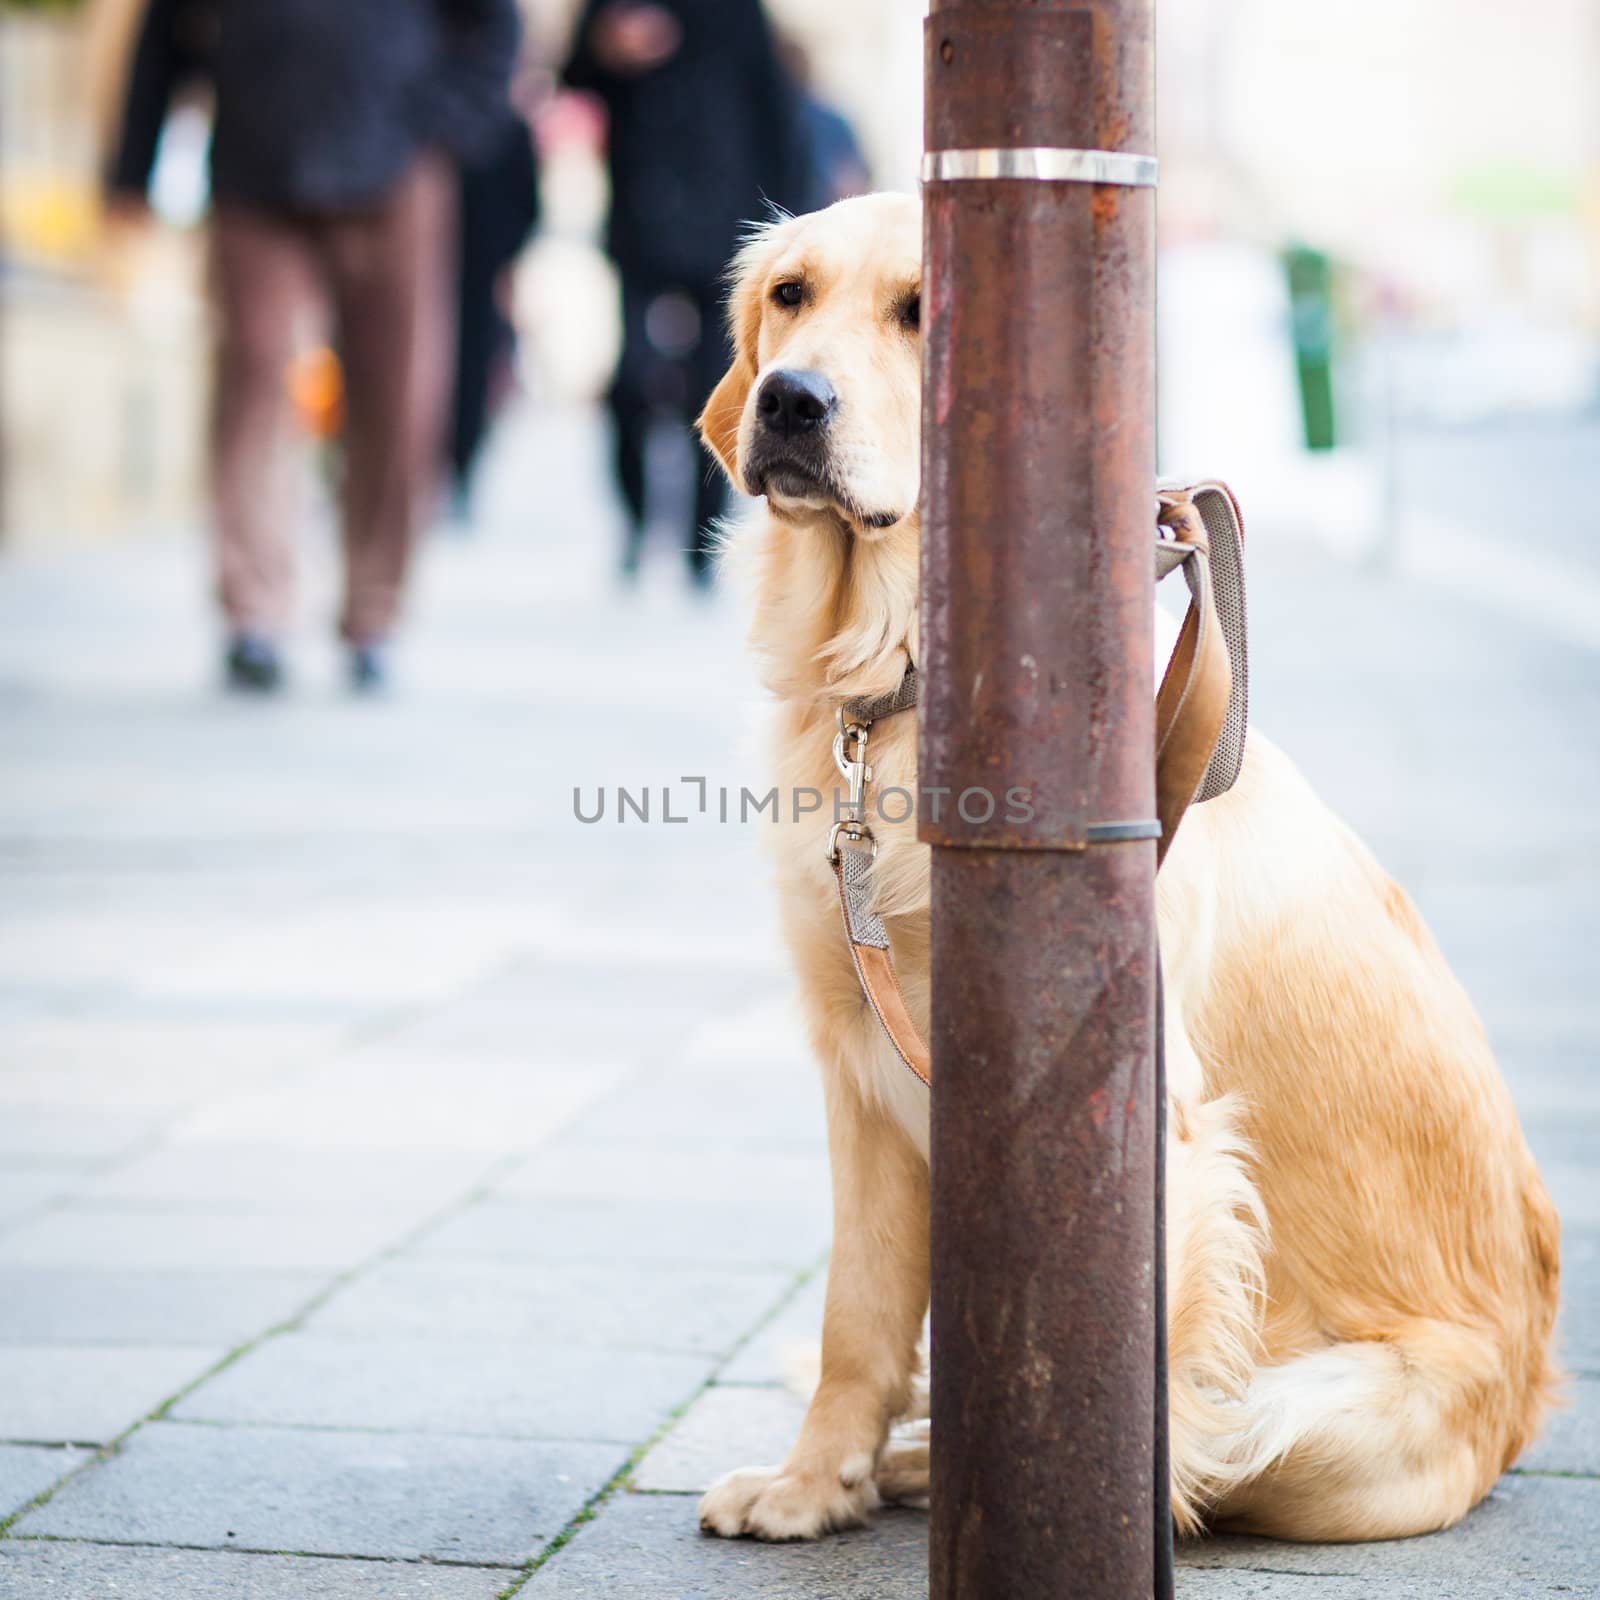 Cute dog waiting patiently for his master on a city street